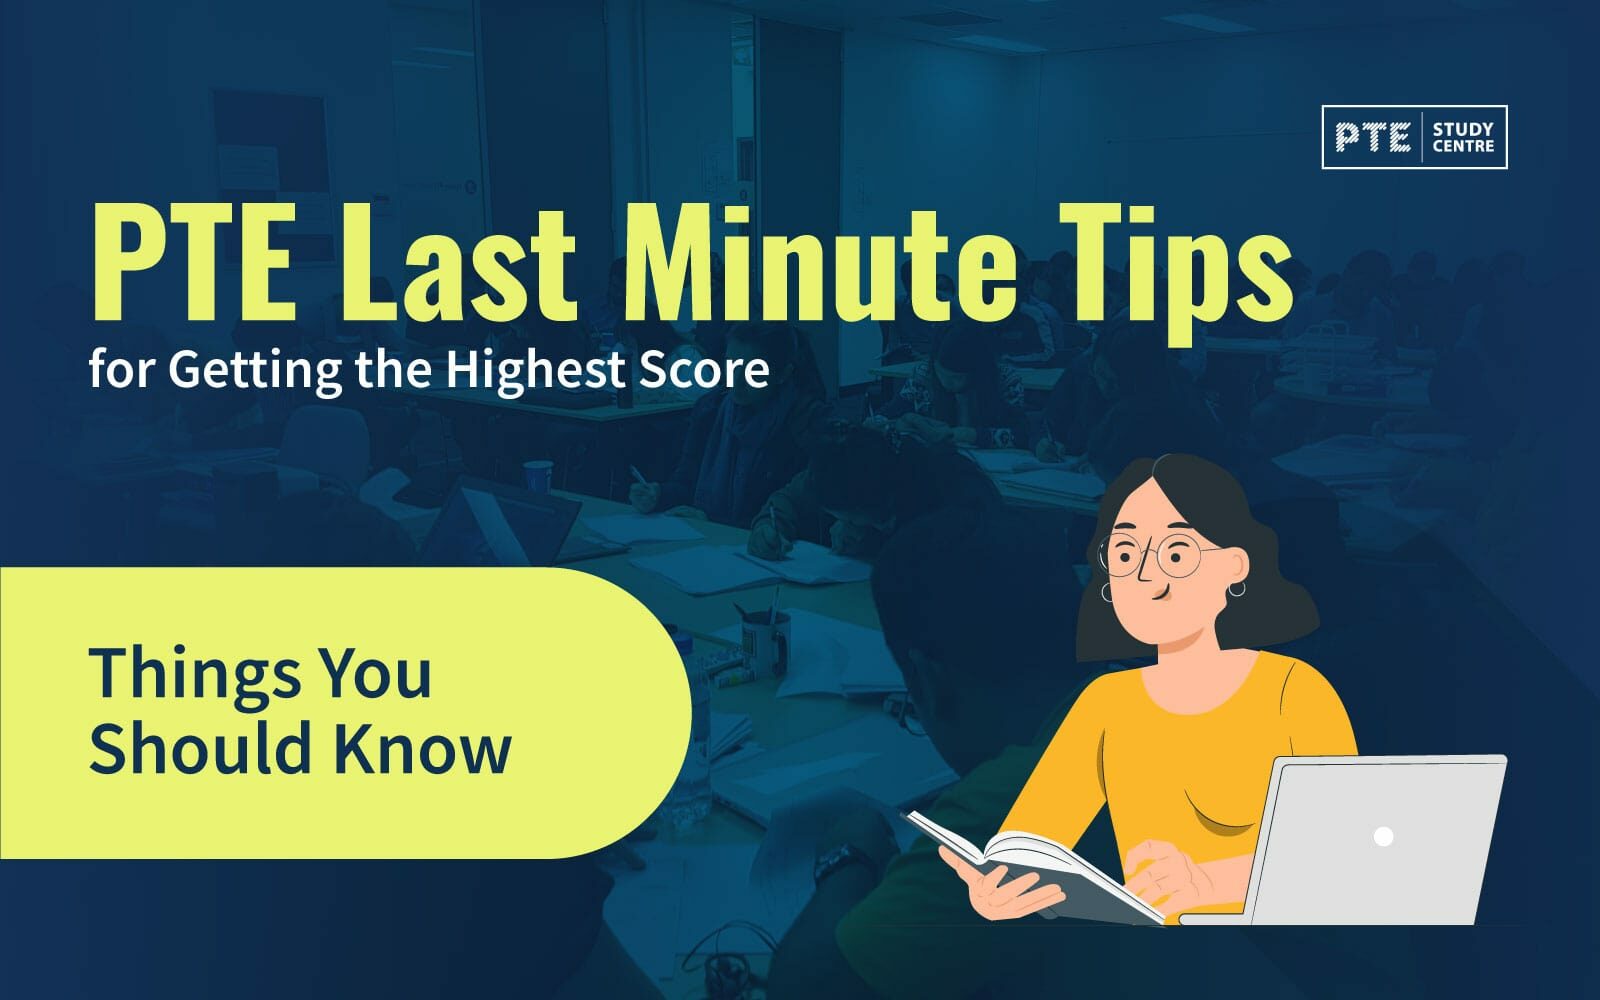 PTE Last Minute Tips for Getting the Highest Score